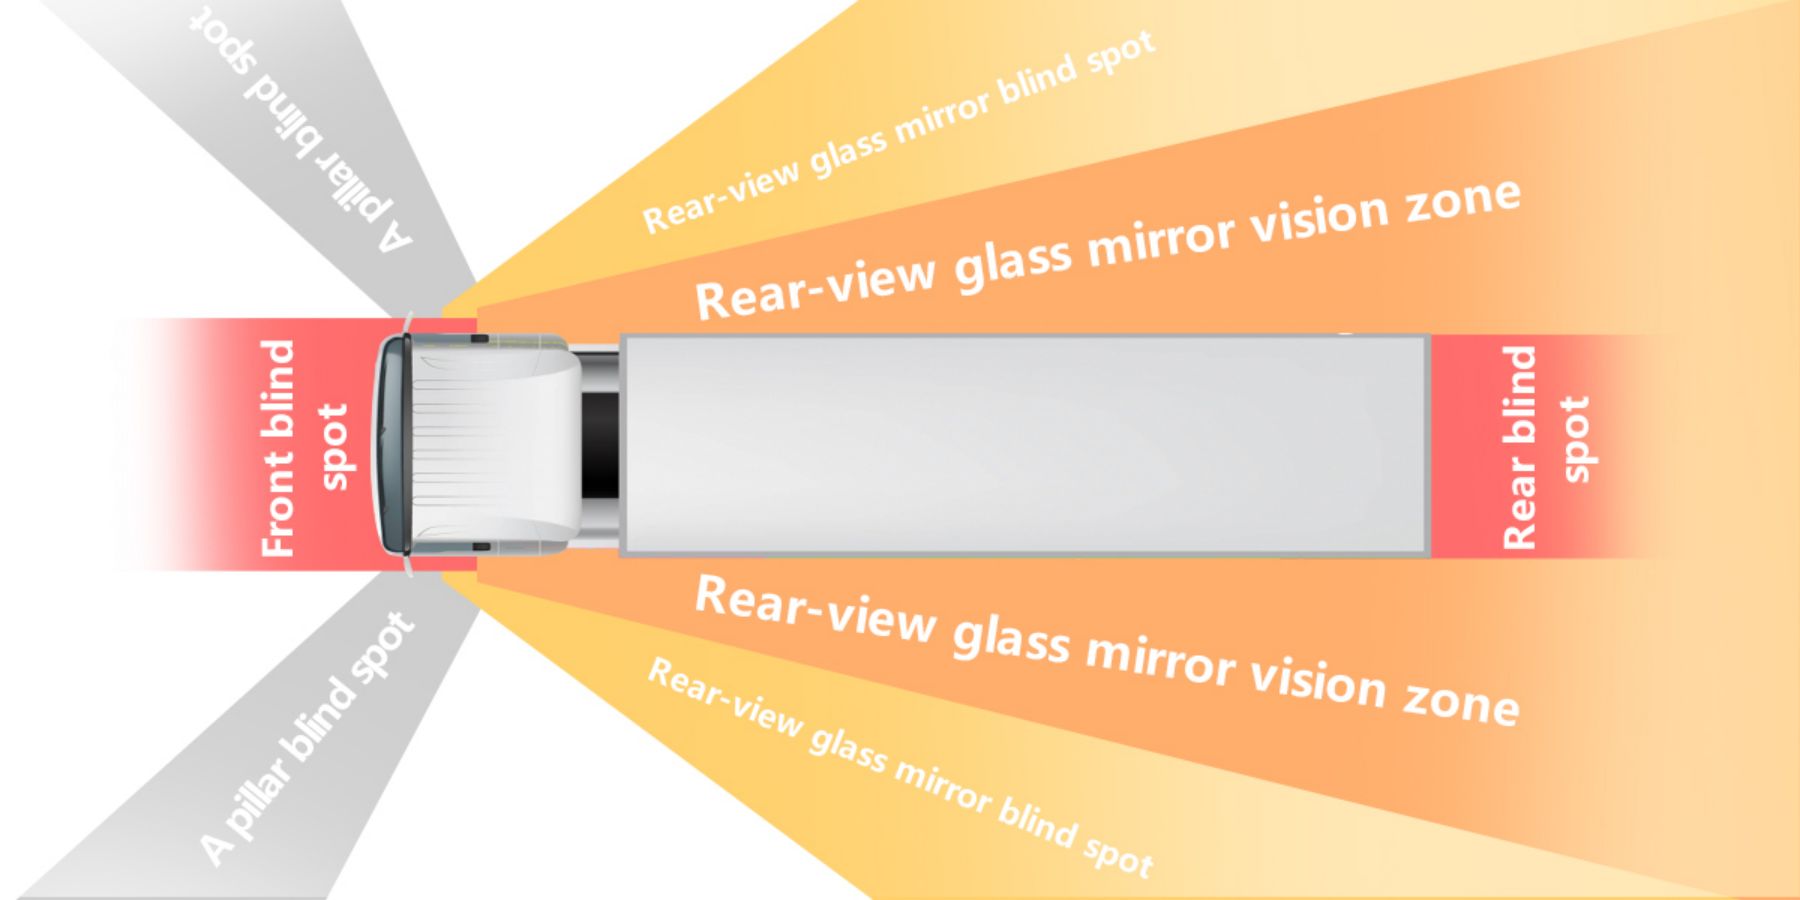 blind spot of traditional view mirror